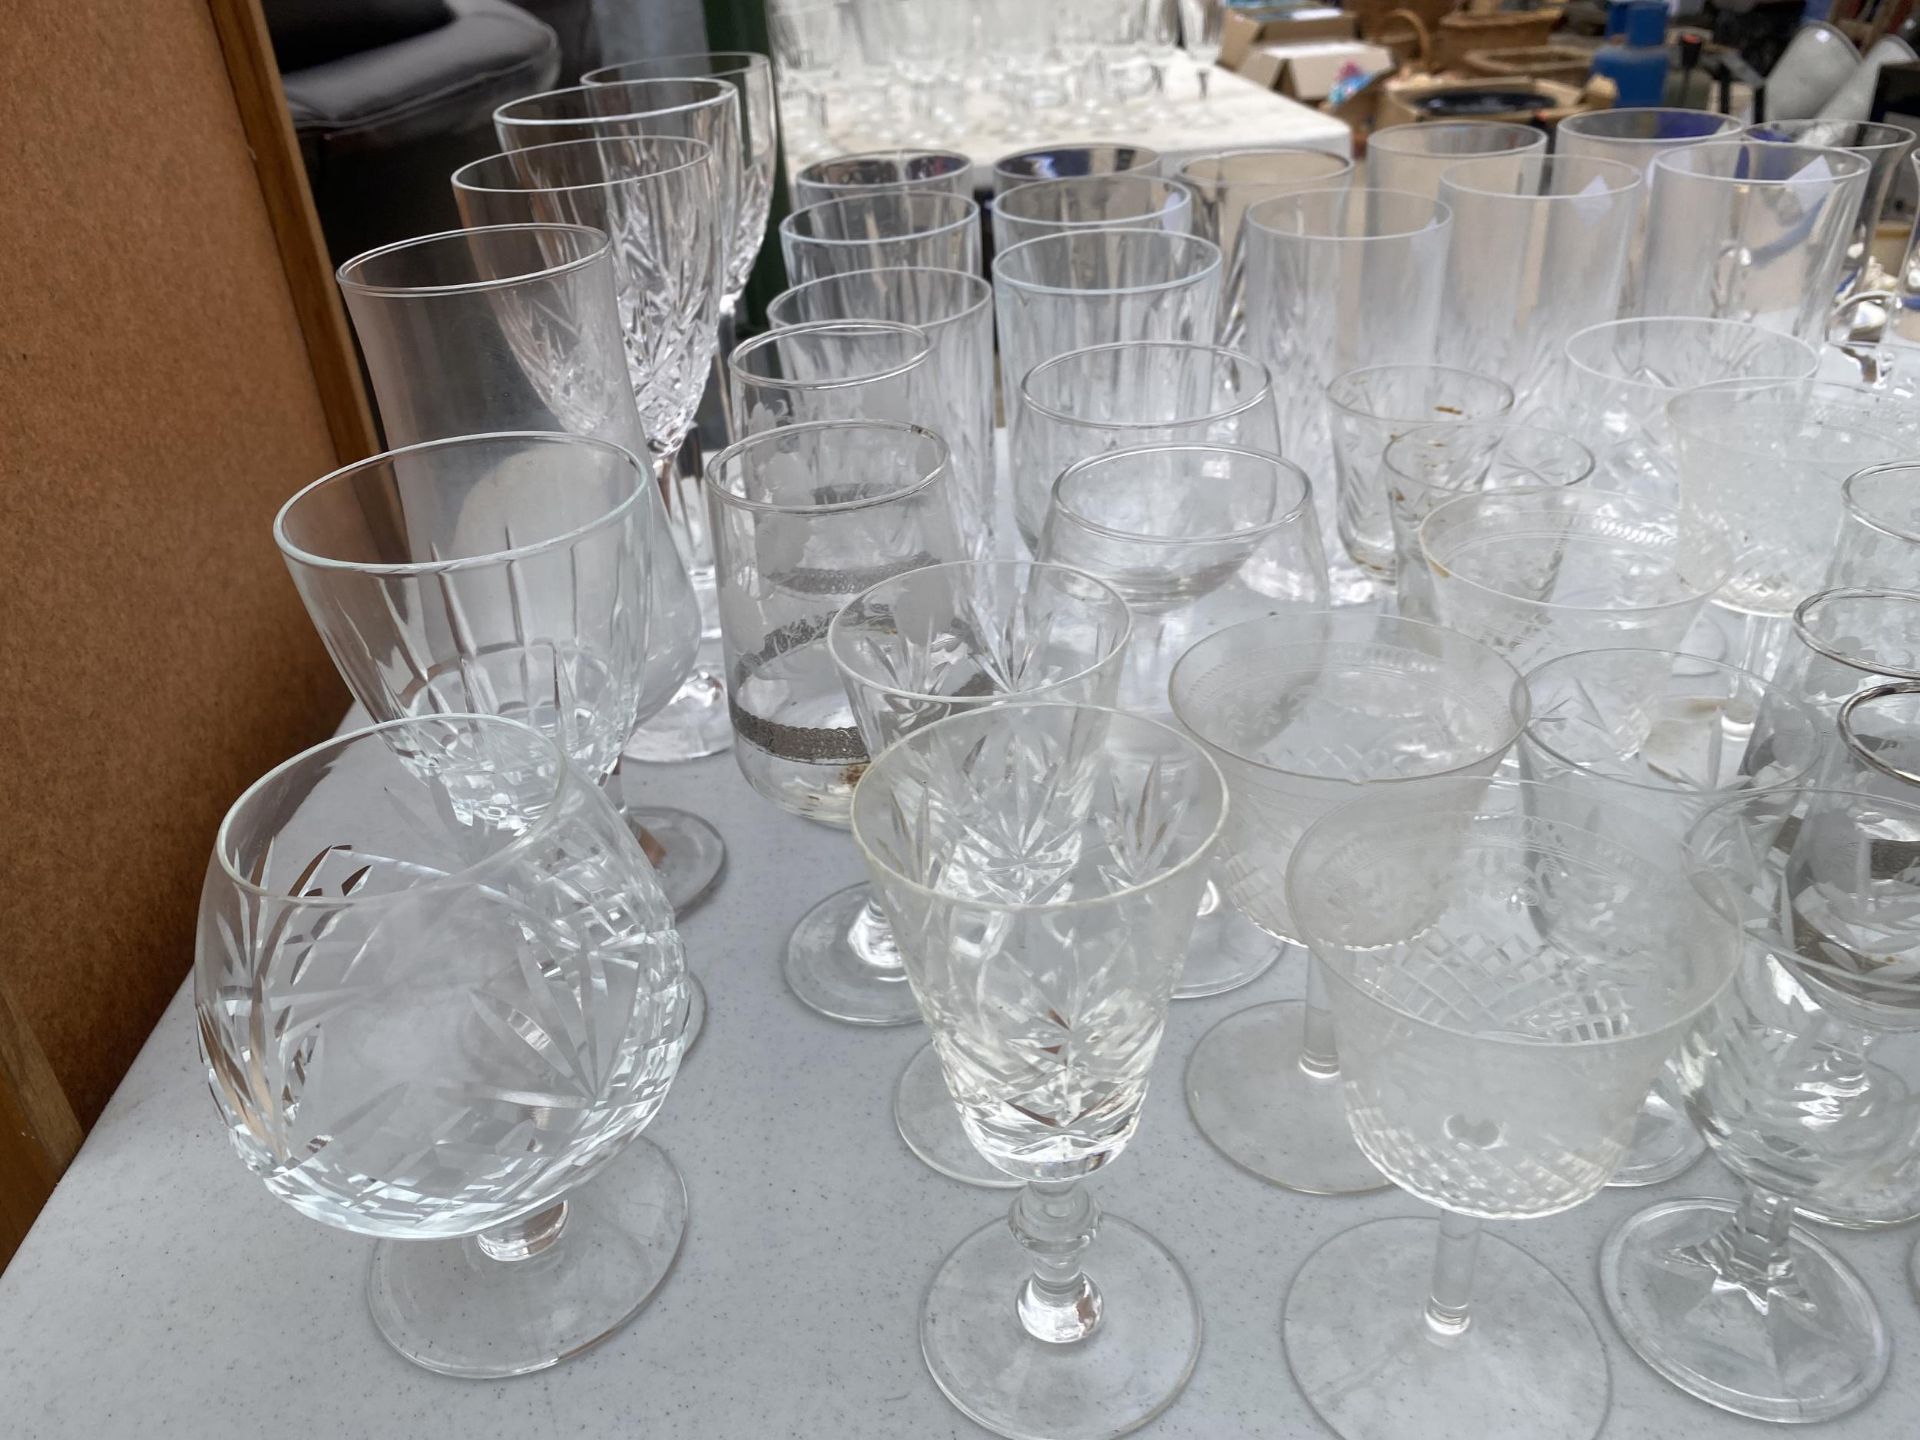 AN ASSORTMENT OF GLASS WARE TO INCLUDE EDINBURGH CRYSTAL TUMBLERS, SHERRY GLASSES AND WINE GLASSES - Image 3 of 6